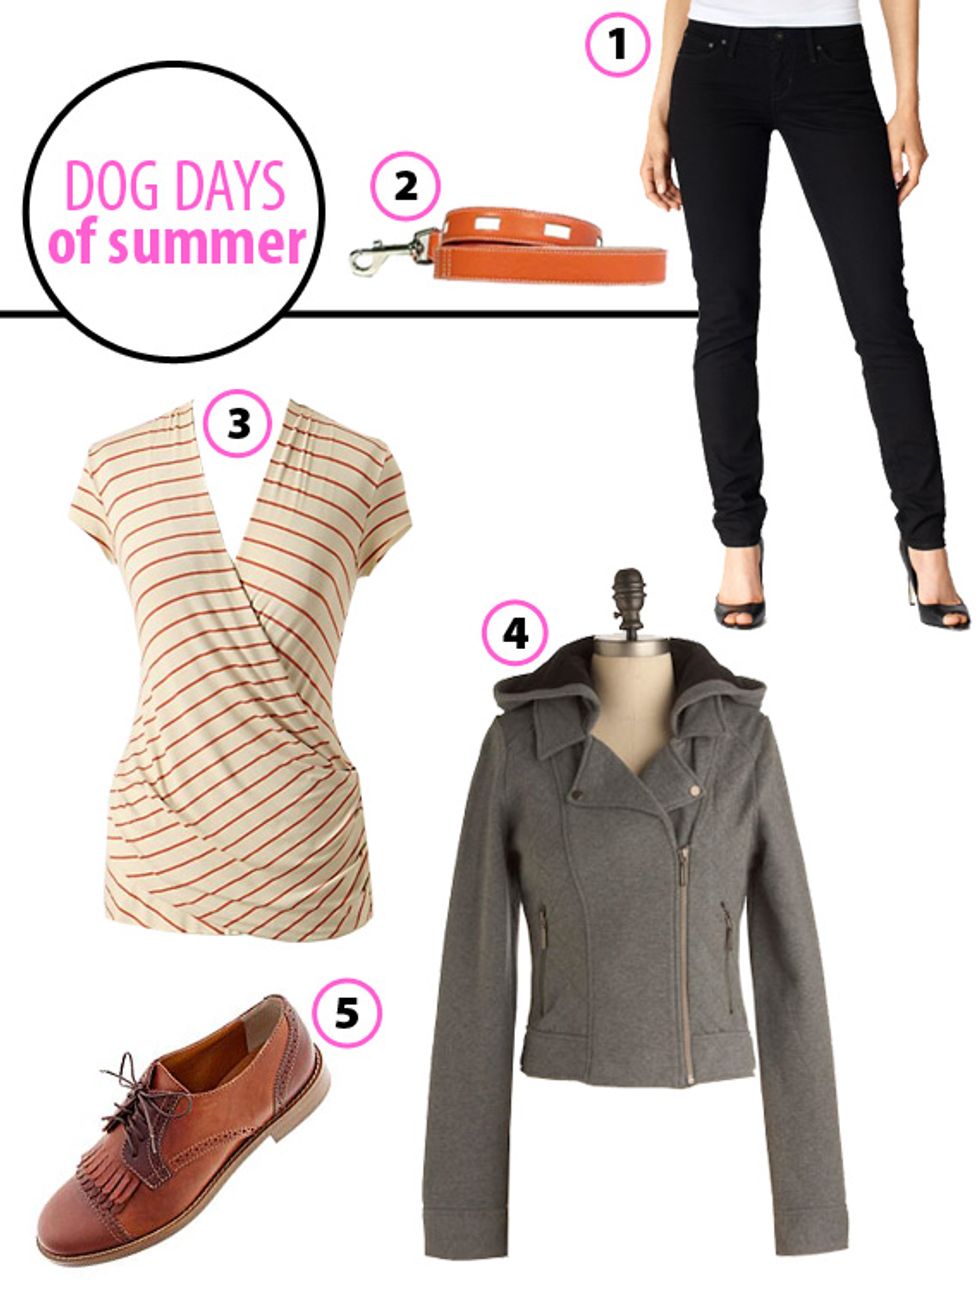 Look of the Week: Dog Days of Summer